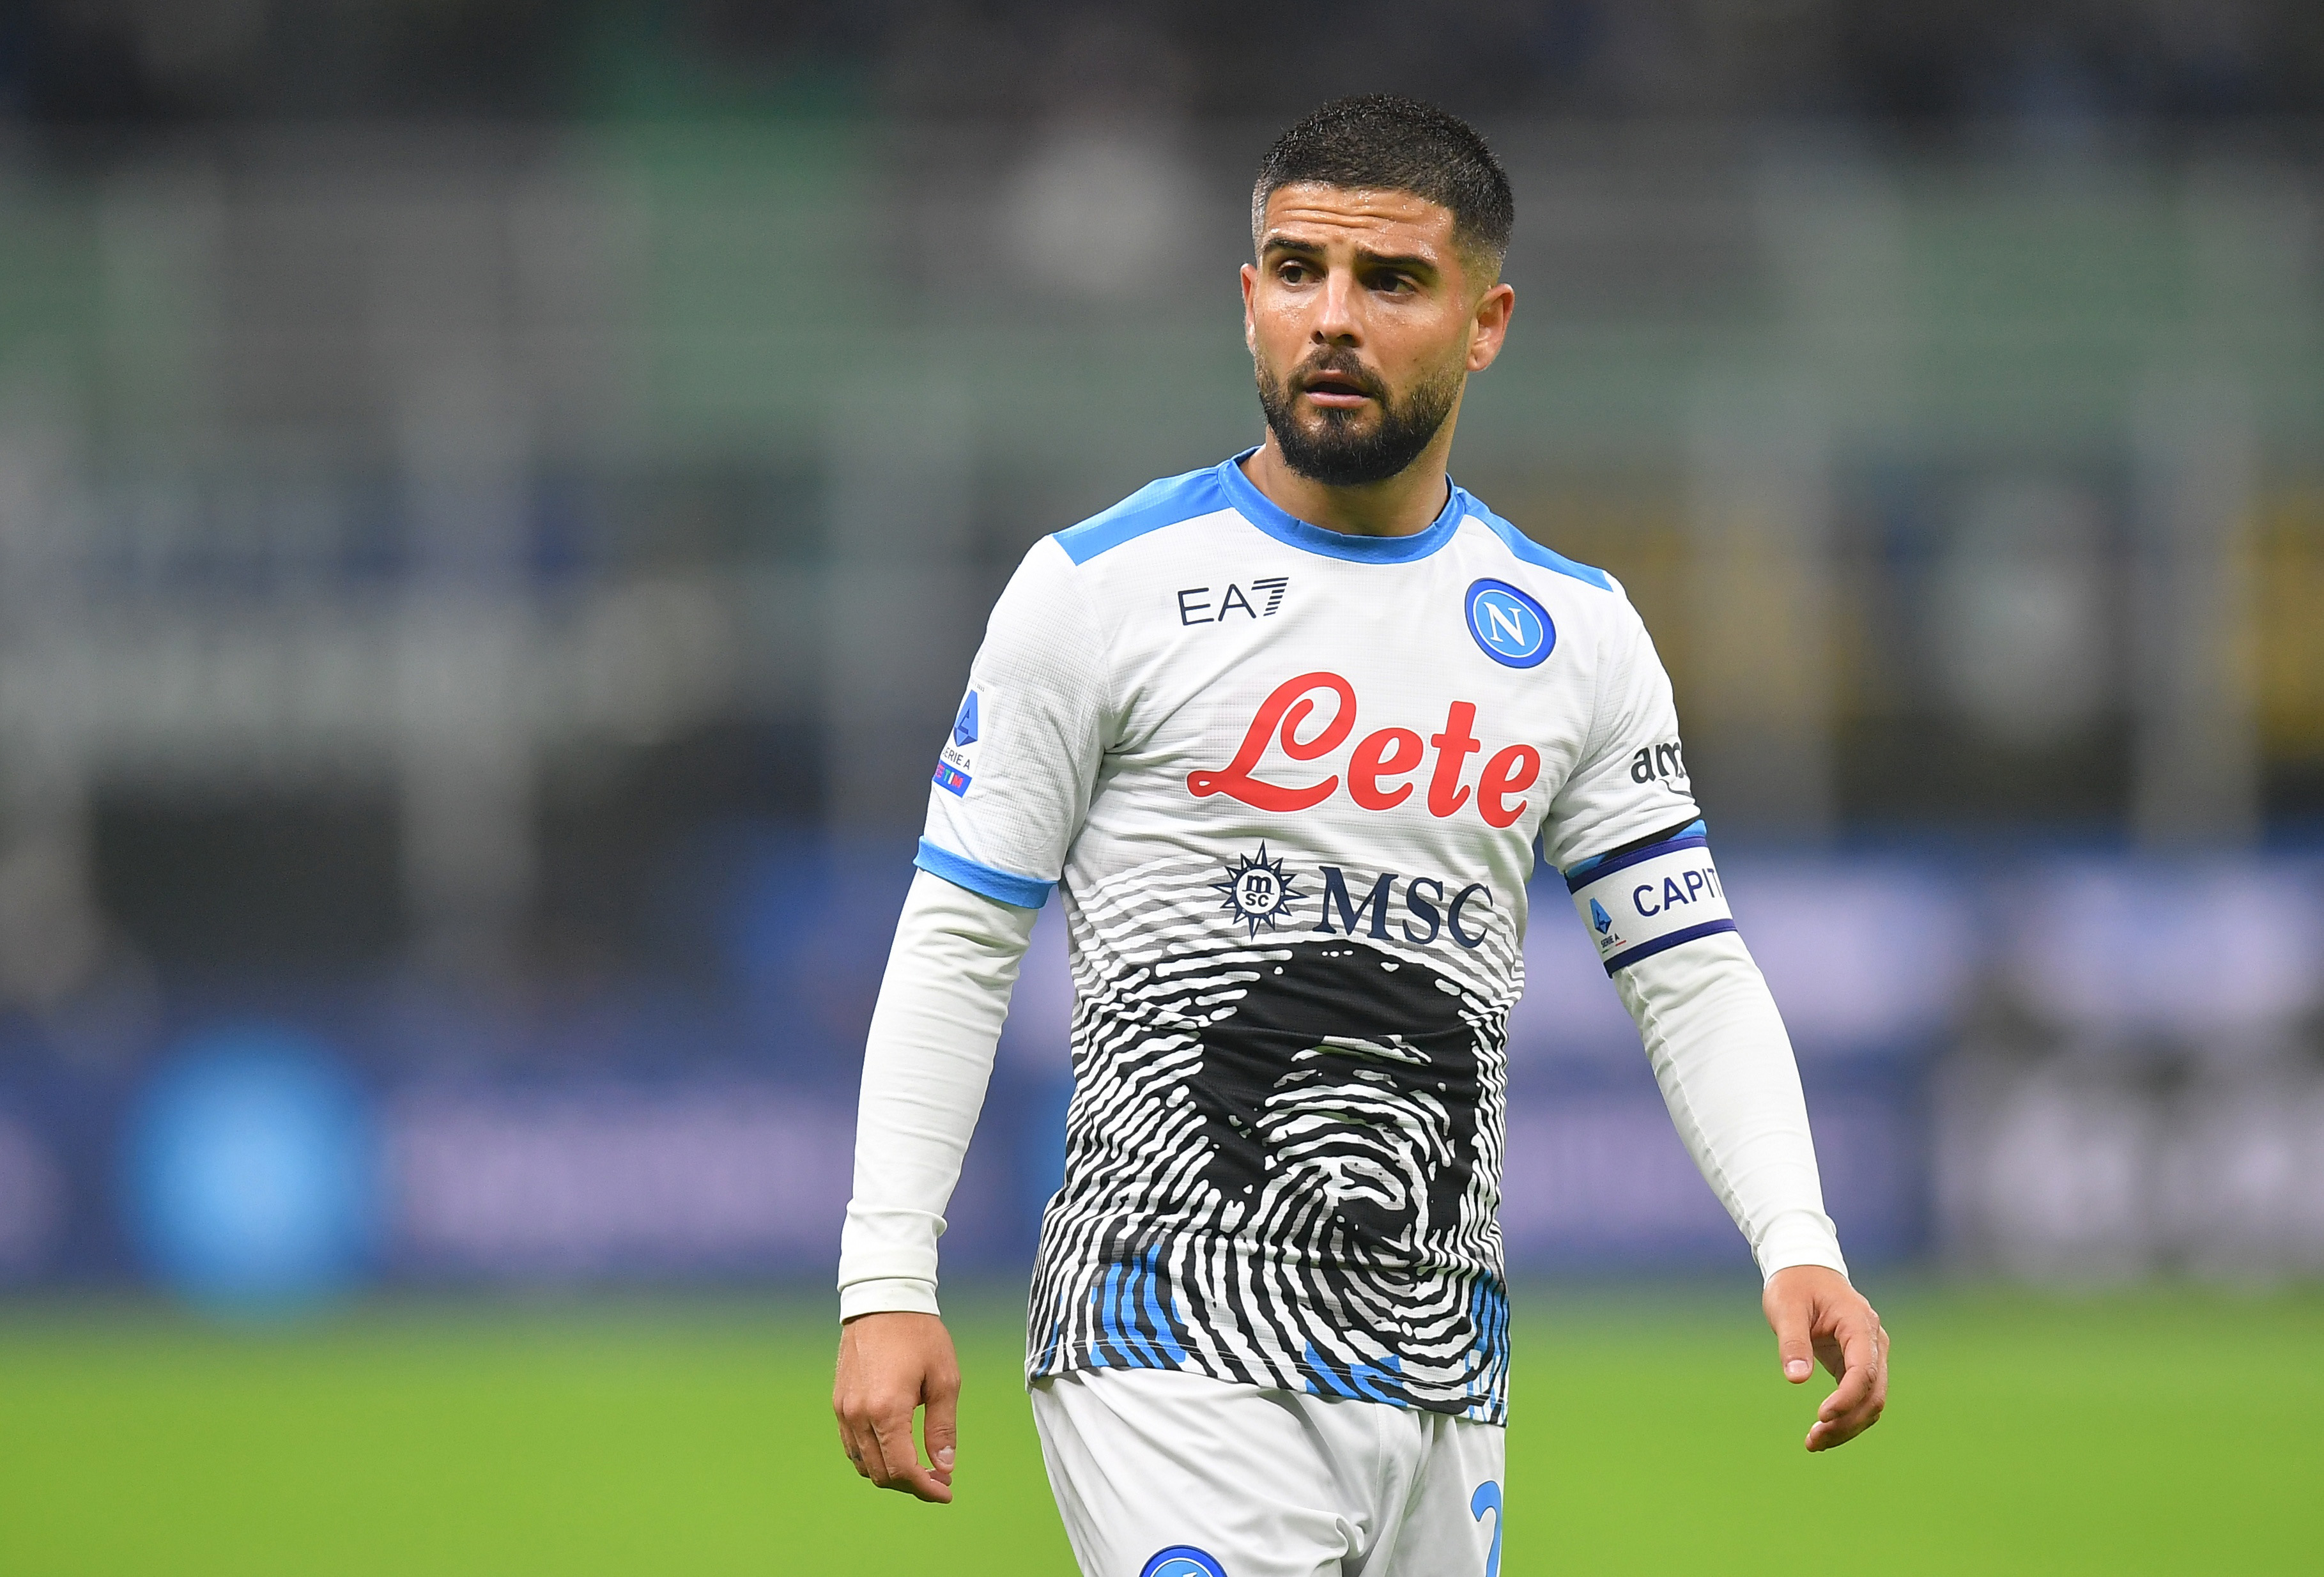 Toronto FC in advanced talks with Italian star Lorenzo Insigne, source says  - The Globe and Mail